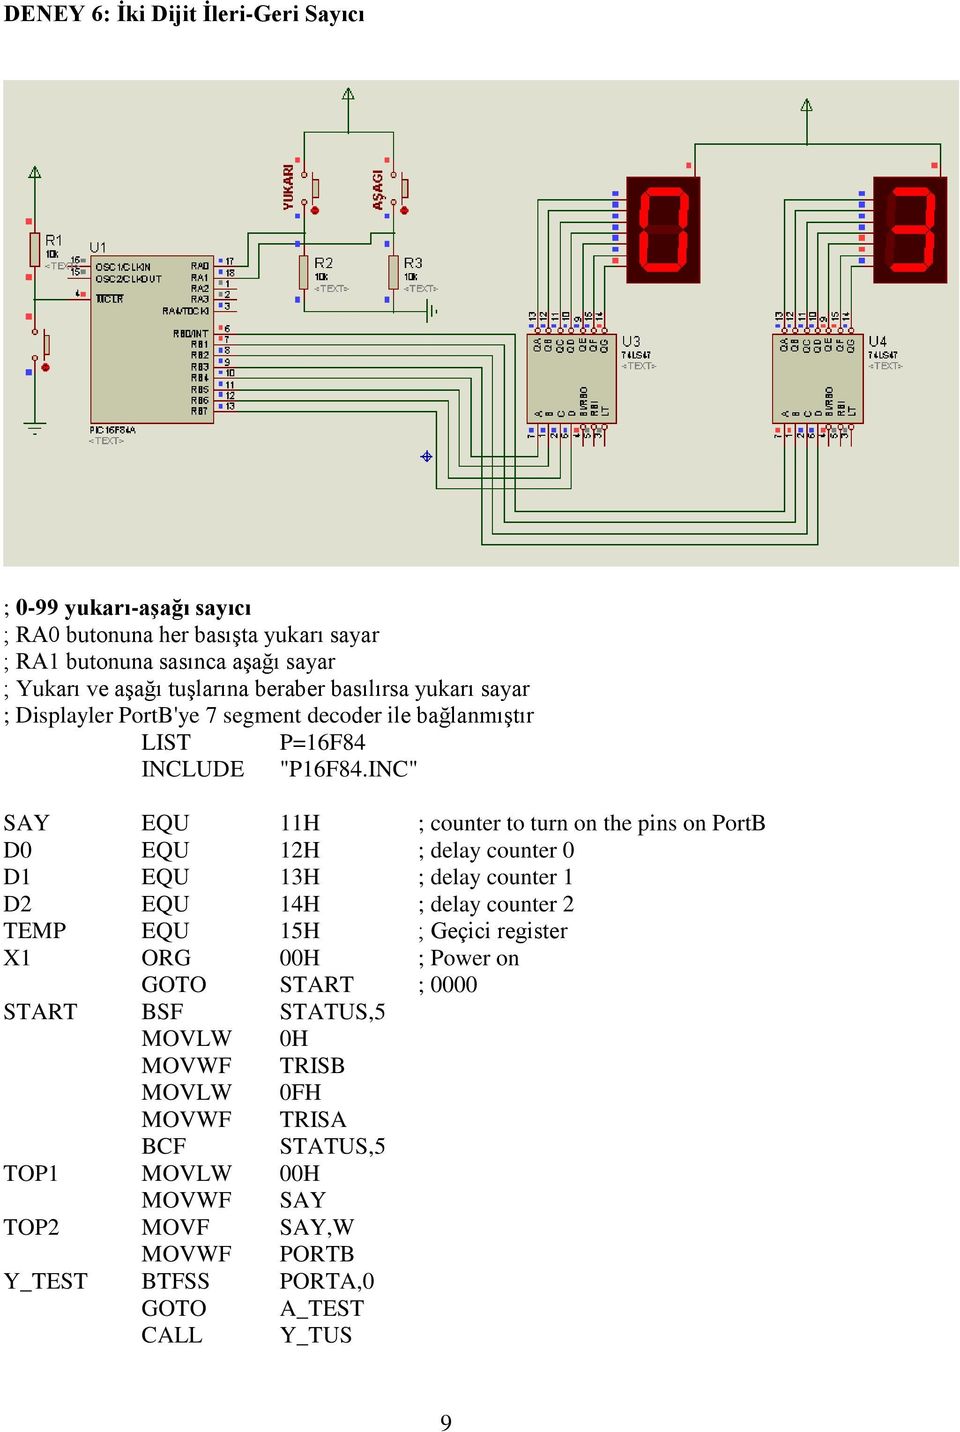 INC" SAY EQU 11H ; counter to turn on the pins on PortB D0 EQU 12H ; delay counter 0 D1 EQU 13H ; delay counter 1 D2 EQU 14H ; delay counter 2 TEMP EQU 15H ; Geçici